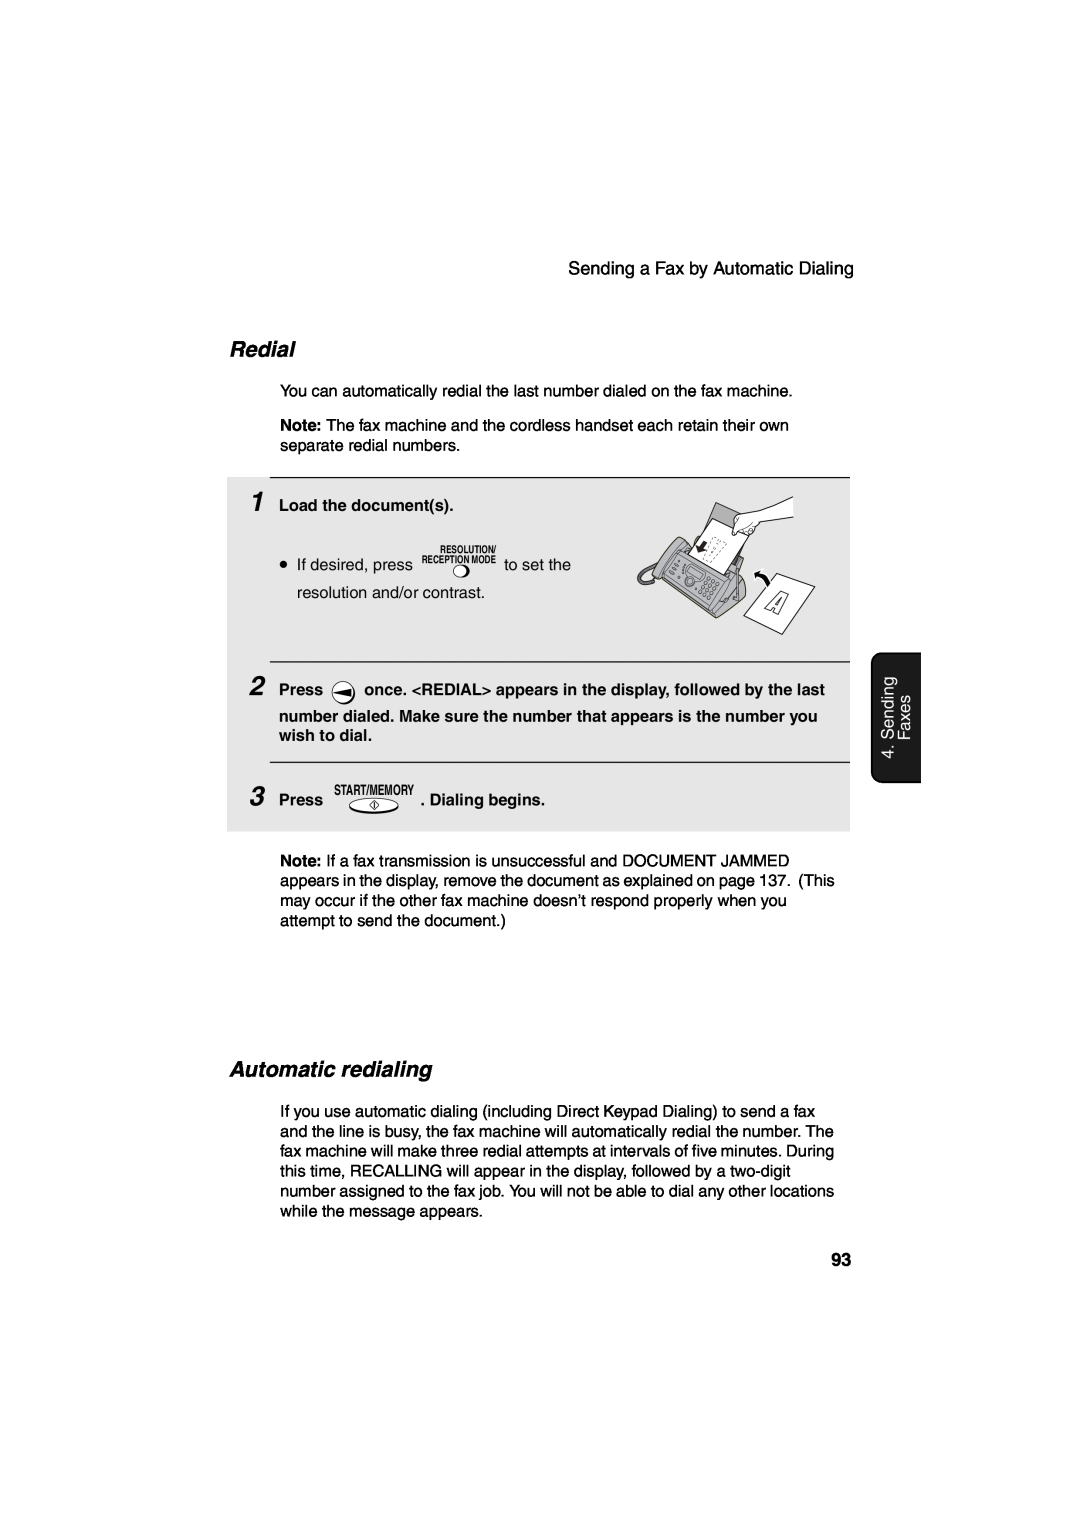 Sharp UX-CD600 operation manual Automatic redialing, Redial, Sending a Fax by Automatic Dialing, Faxes 